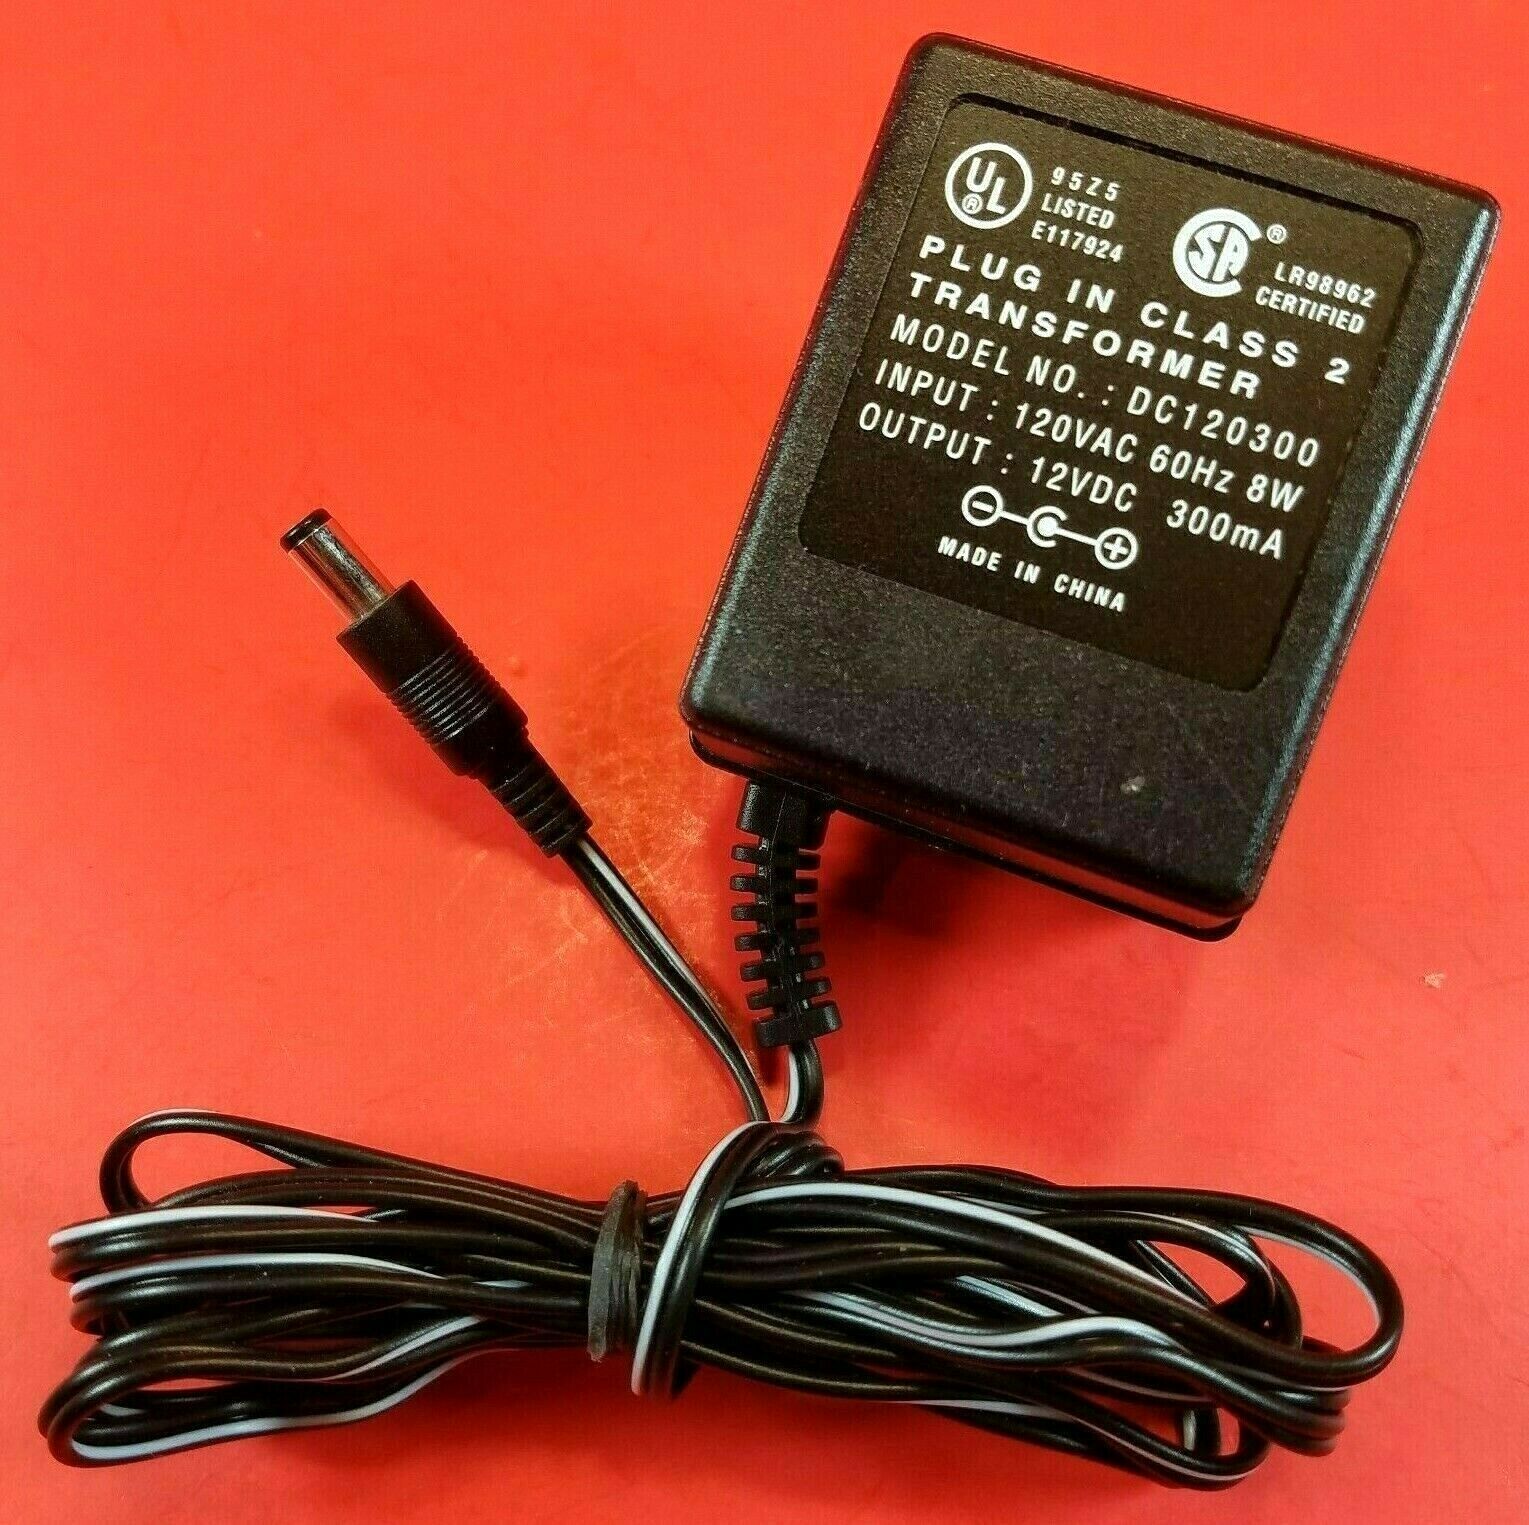 Plug In Class 2 Transformer DC120300 Power Supply 12V - 300mA OEM AC/DC Adapter Type: AC Adapter Output Voltage: 12 V